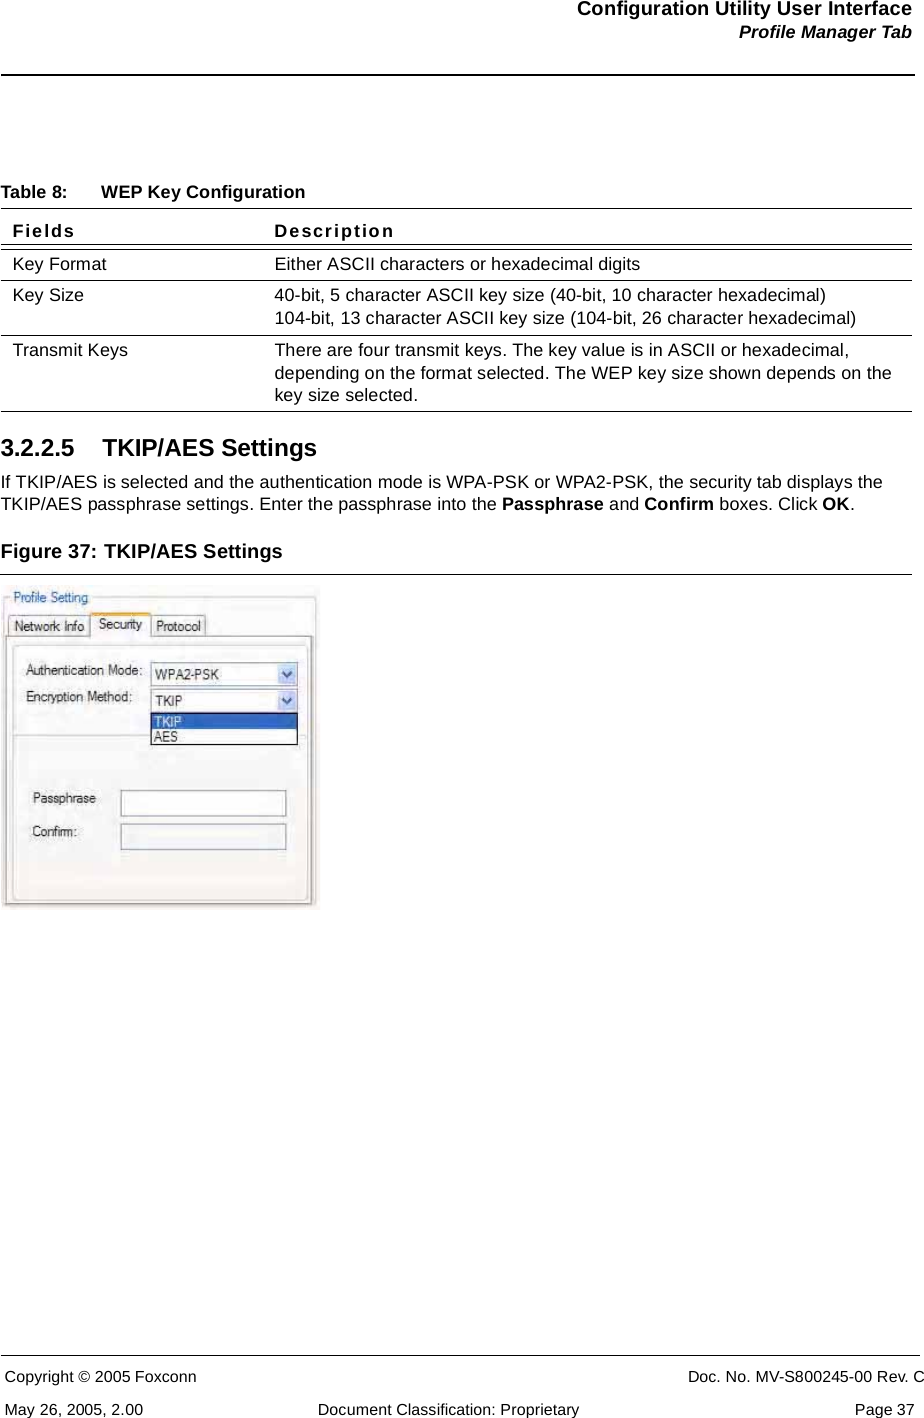 Configuration Utility User InterfaceProfile Manager TabCopyright © 2005 Foxconn CONFIDENTIAL Doc. No. MV-S800245-00 Rev. CMay 26, 2005, 2.00 Document Classification: Proprietary  Page 373.2.2.5 TKIP/AES SettingsIf TKIP/AES is selected and the authentication mode is WPA-PSK or WPA2-PSK, the security tab displays the TKIP/AES passphrase settings. Enter the passphrase into the Passphrase and Confirm boxes. Click OK.Figure 37: TKIP/AES Settings Table 8: WEP Key ConfigurationFields DescriptionKey Format Either ASCII characters or hexadecimal digitsKey Size 40-bit, 5 character ASCII key size (40-bit, 10 character hexadecimal) 104-bit, 13 character ASCII key size (104-bit, 26 character hexadecimal)Transmit Keys There are four transmit keys. The key value is in ASCII or hexadecimal, depending on the format selected. The WEP key size shown depends on the key size selected.